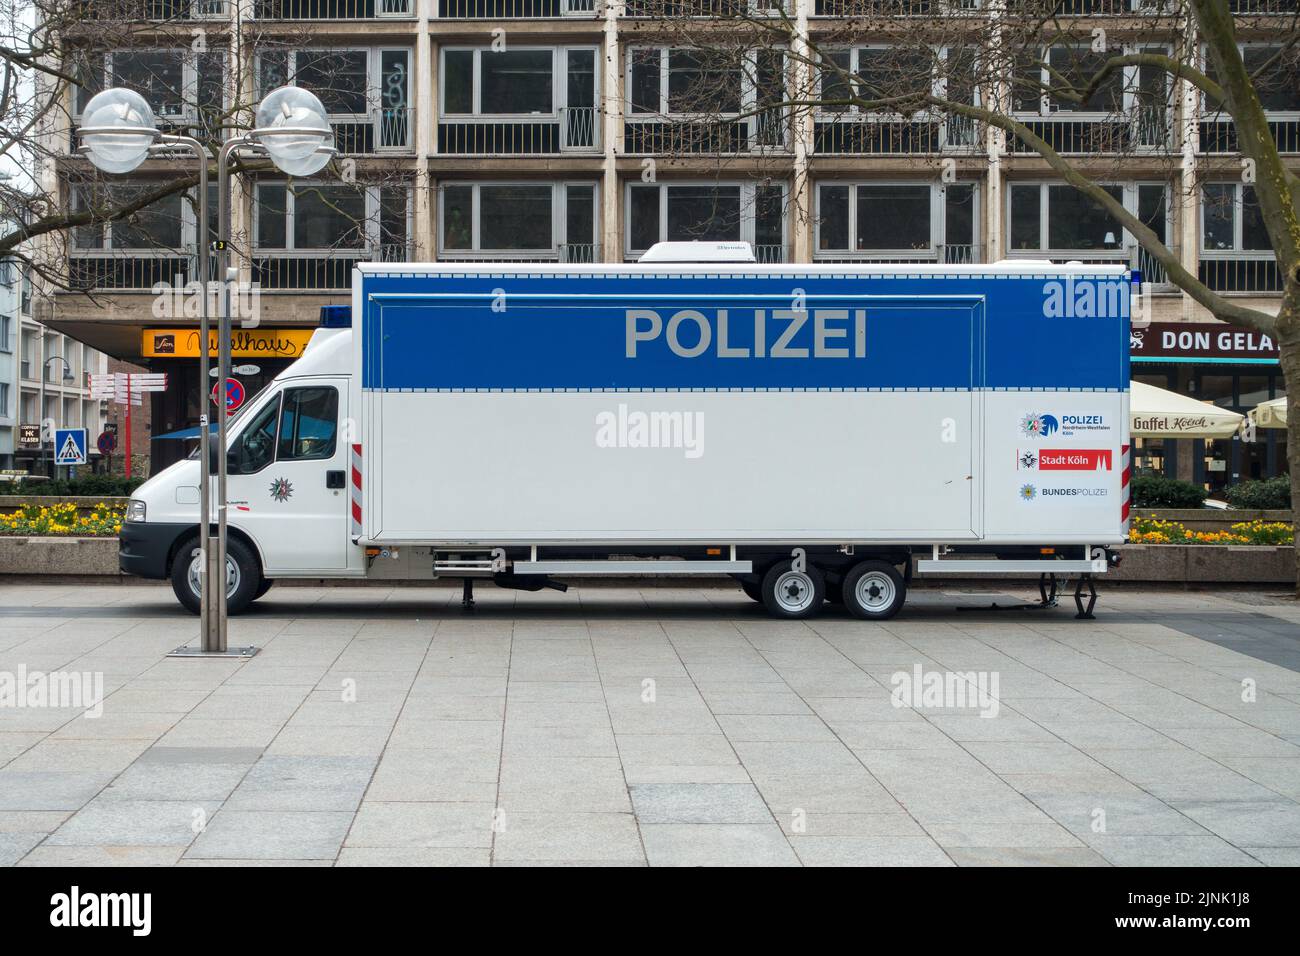 COLOGNE, GERMANY - MARCH 19, 2016: Mobile police command center parked near the cathedral in Cologne, Germany on March 19, 2016. Stock Photo